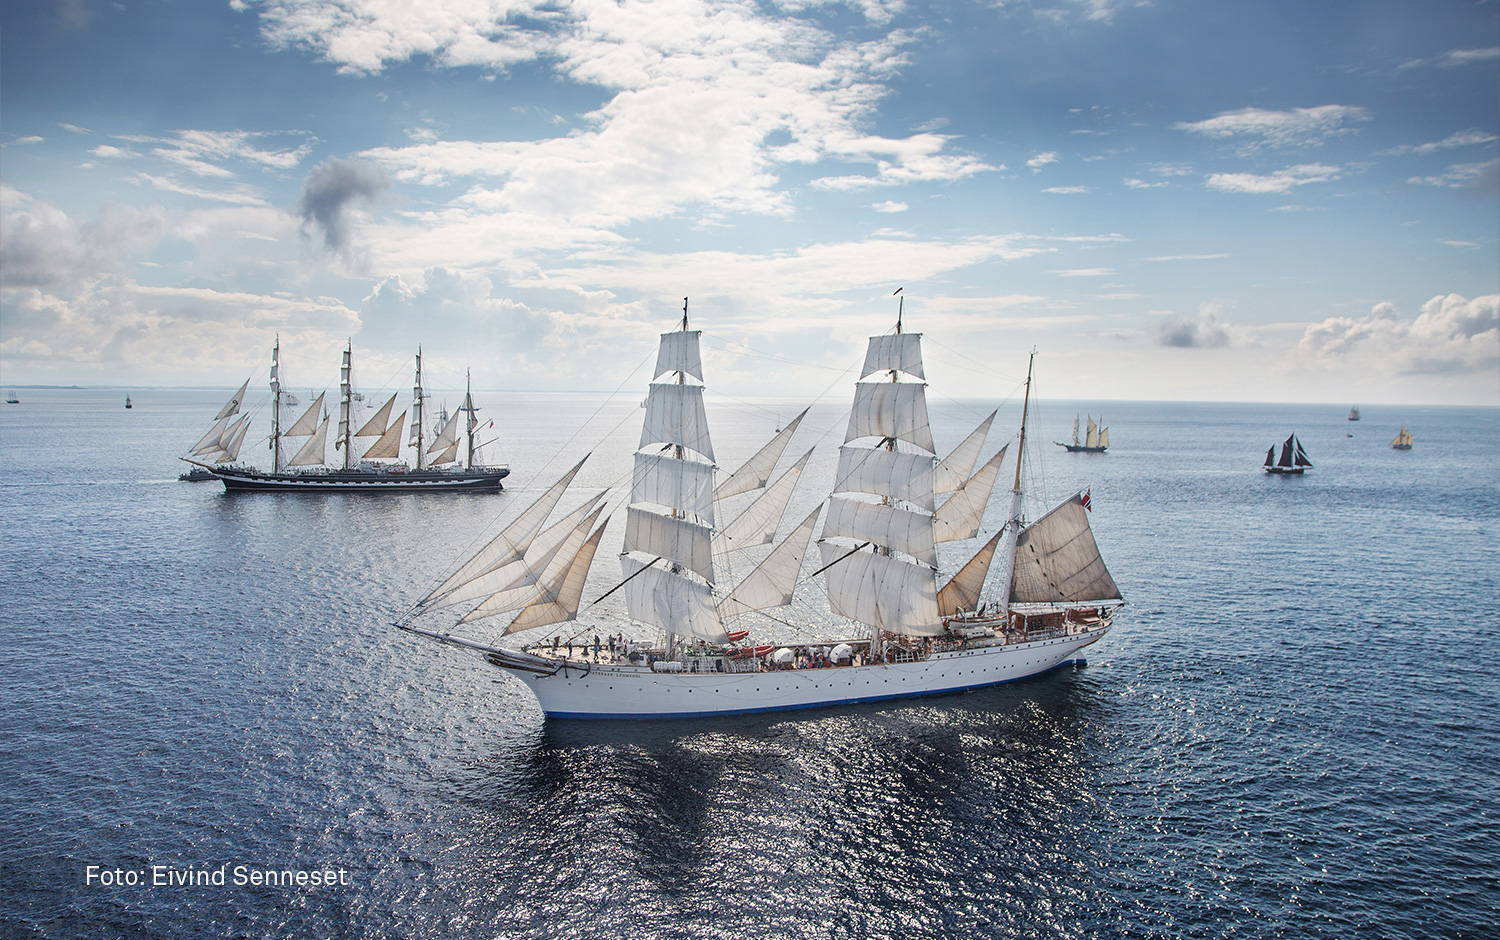 The Tall Ships Races